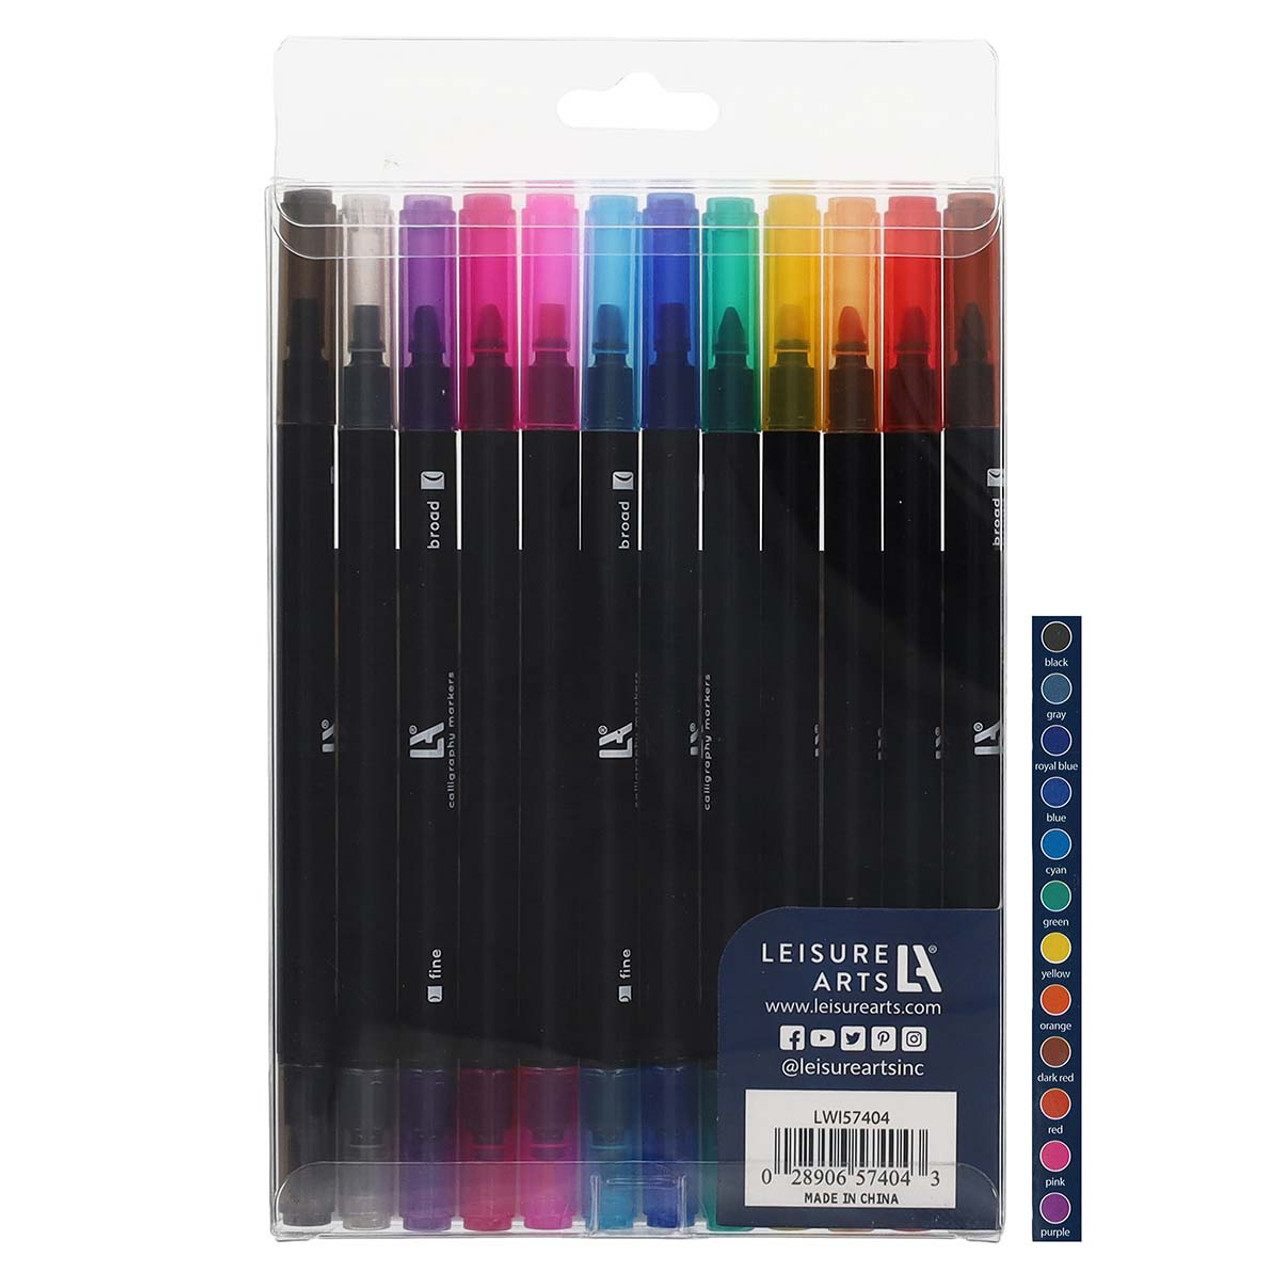 Leisure Arts Dual Ended Calligraphy Markers